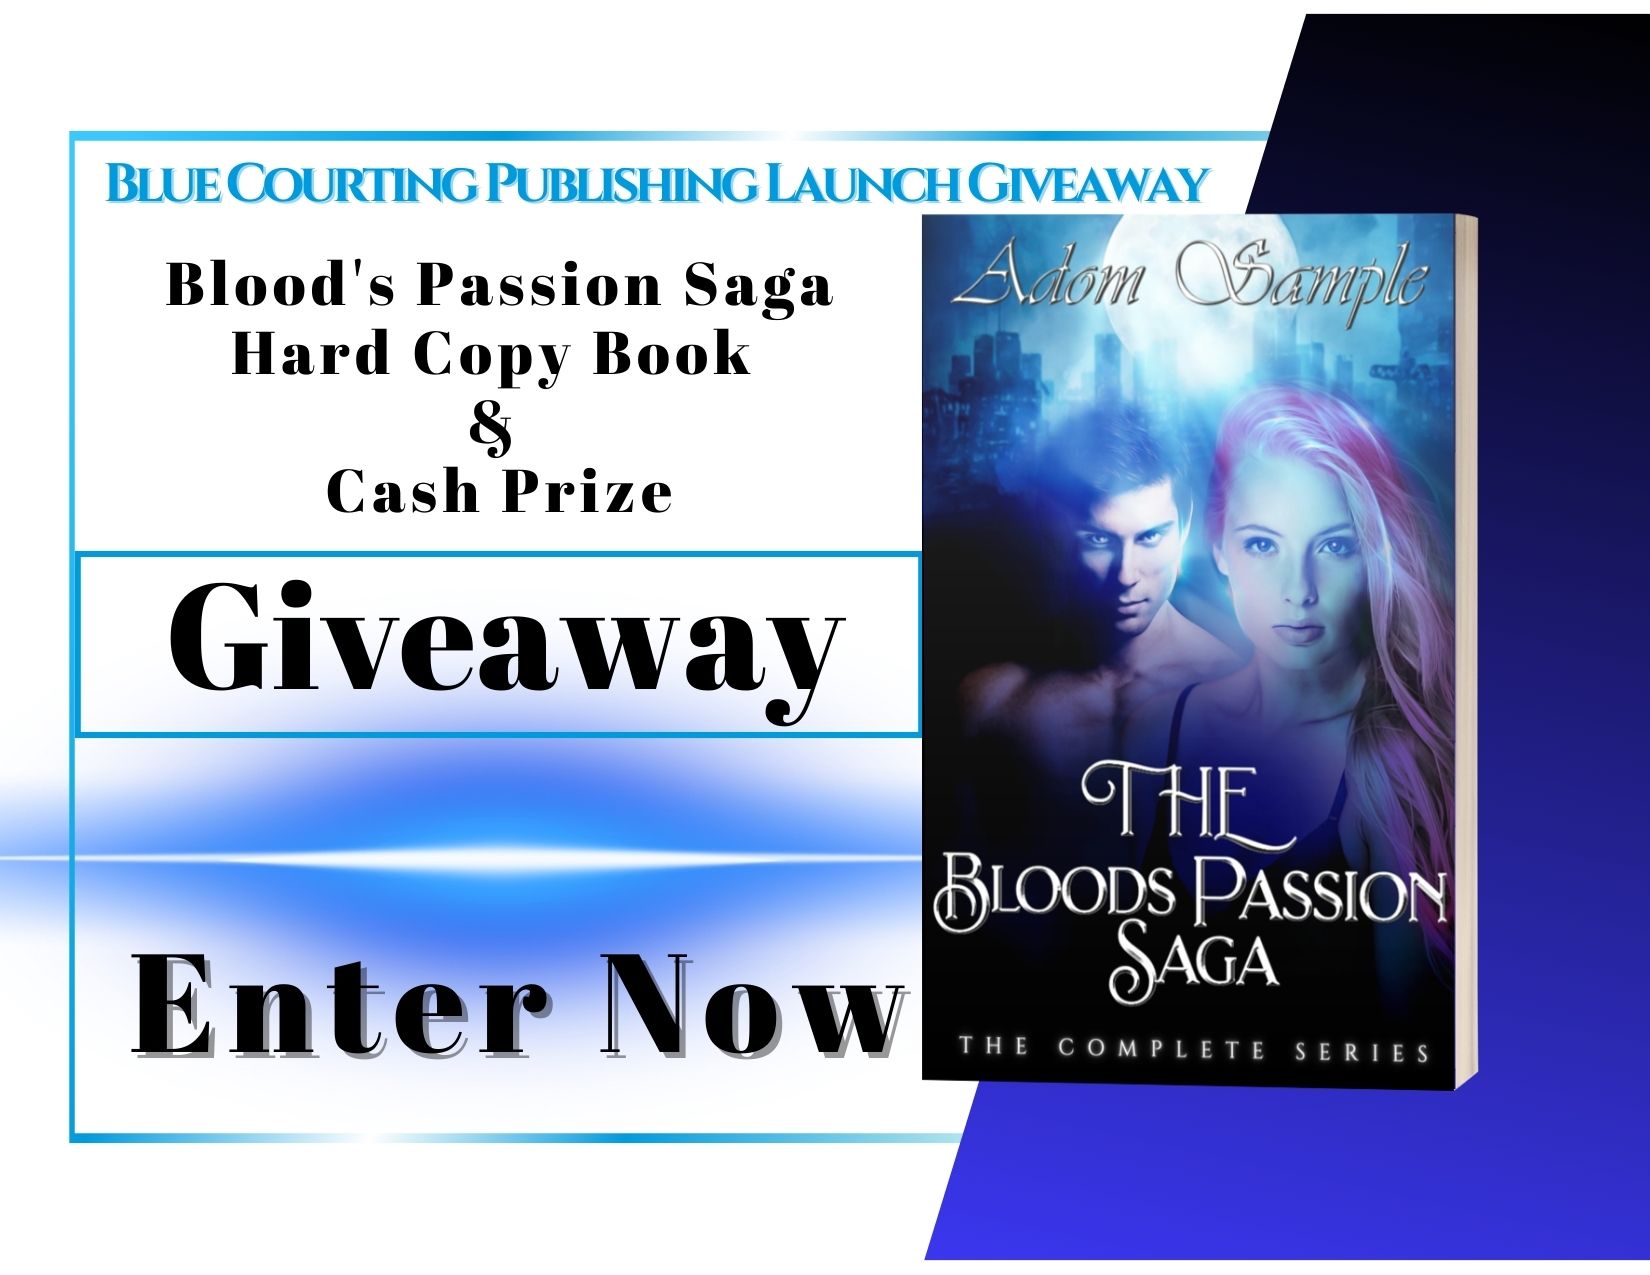 Hardcover Book of the Bloods Passion Saga and $100 Cash Prize Giveaway